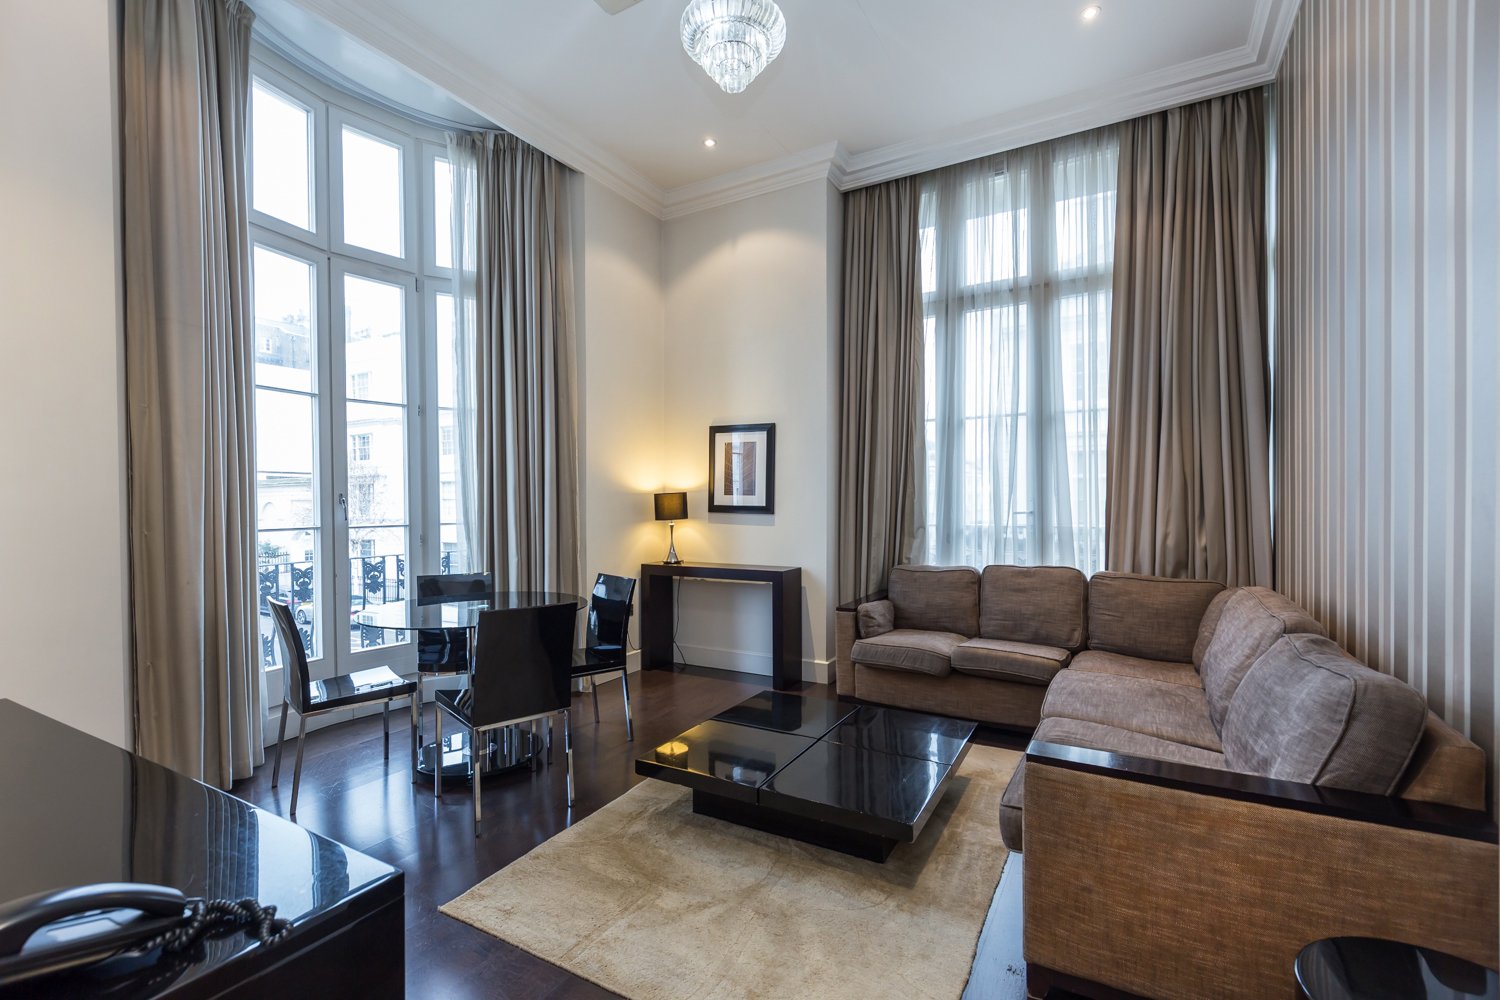 Serviced Accommodation Paddington in Central London | 5 Star Short Let Apartments near Hyde Park | Lift, Aircon, 24h Reception | Urban Stay